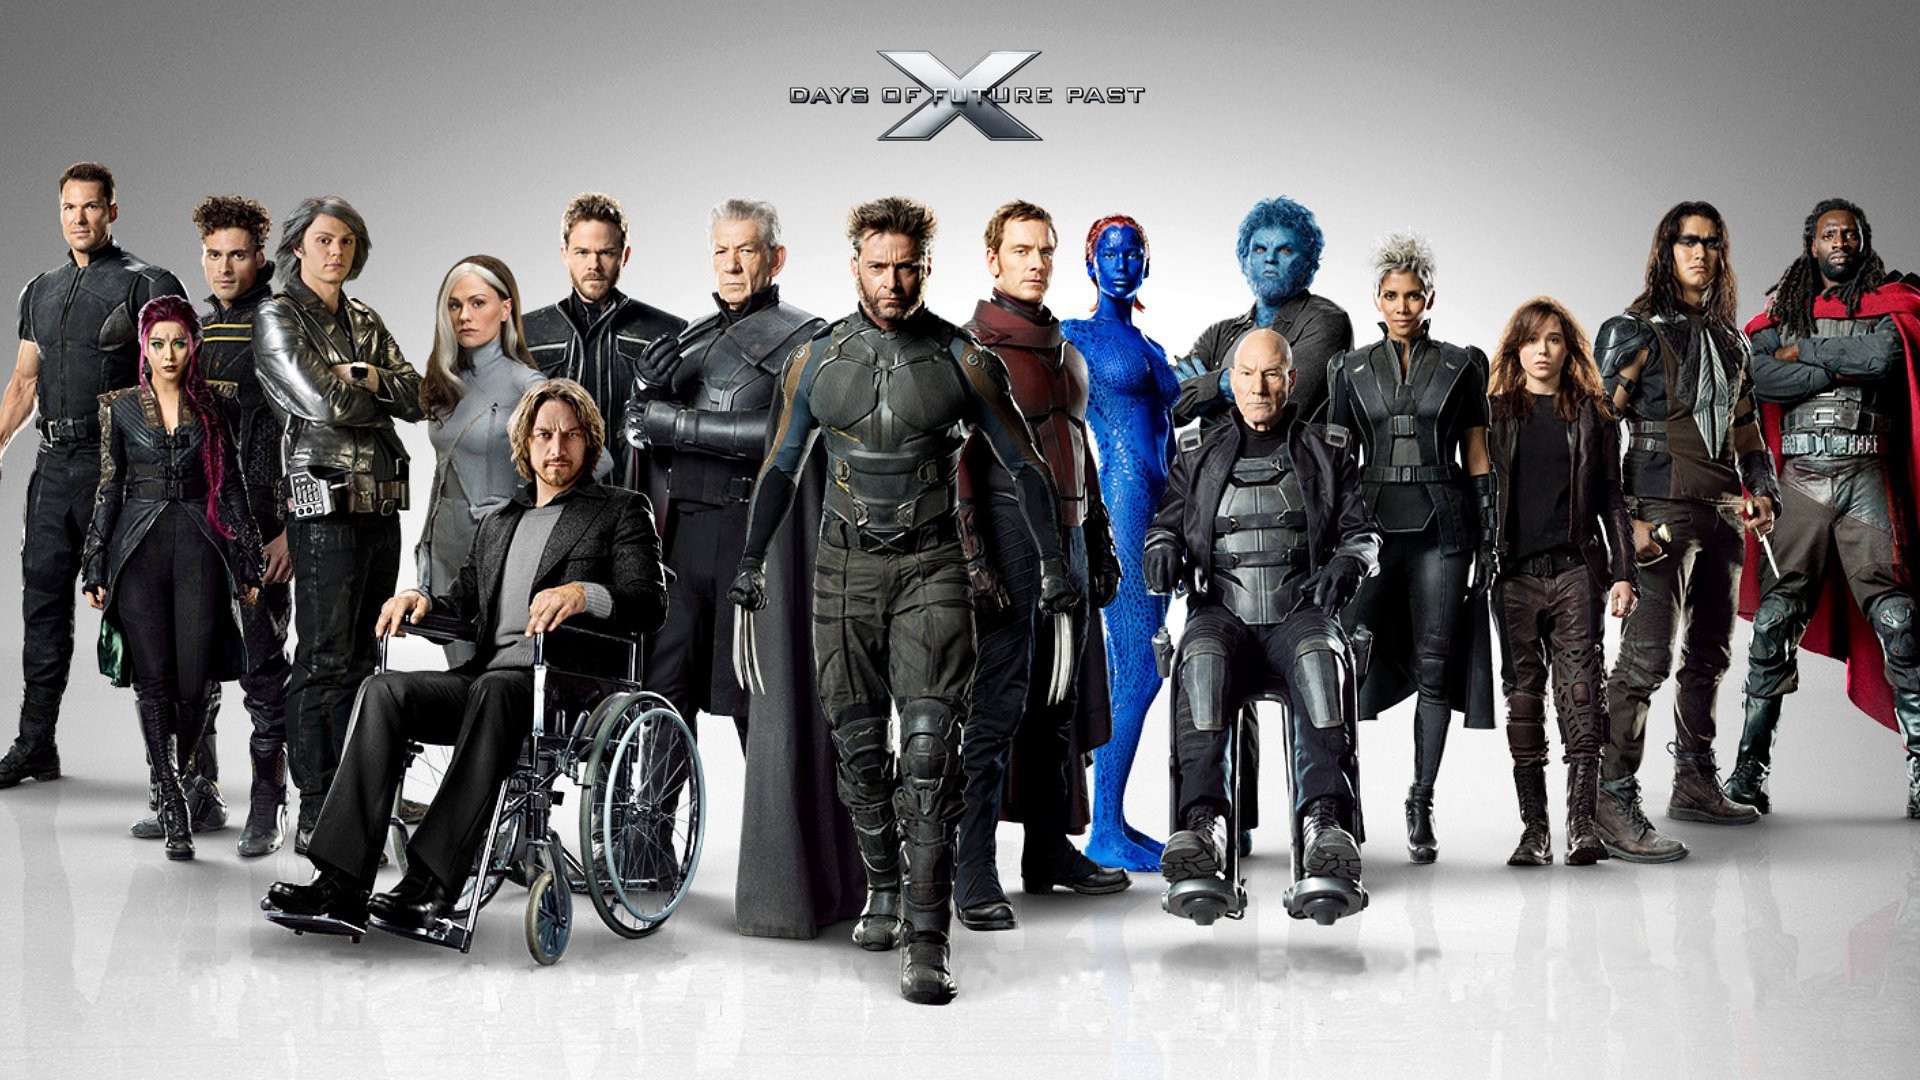 movies, X Men: Days Of Future Past, Wolverine, Magneto, Charles Xavier, Mystique, , Rogue (character), Storm (character),  Patrick Stewart, Michael Fassbender, James McAvoy, Ellen Page, Halle Berry Wallpaper